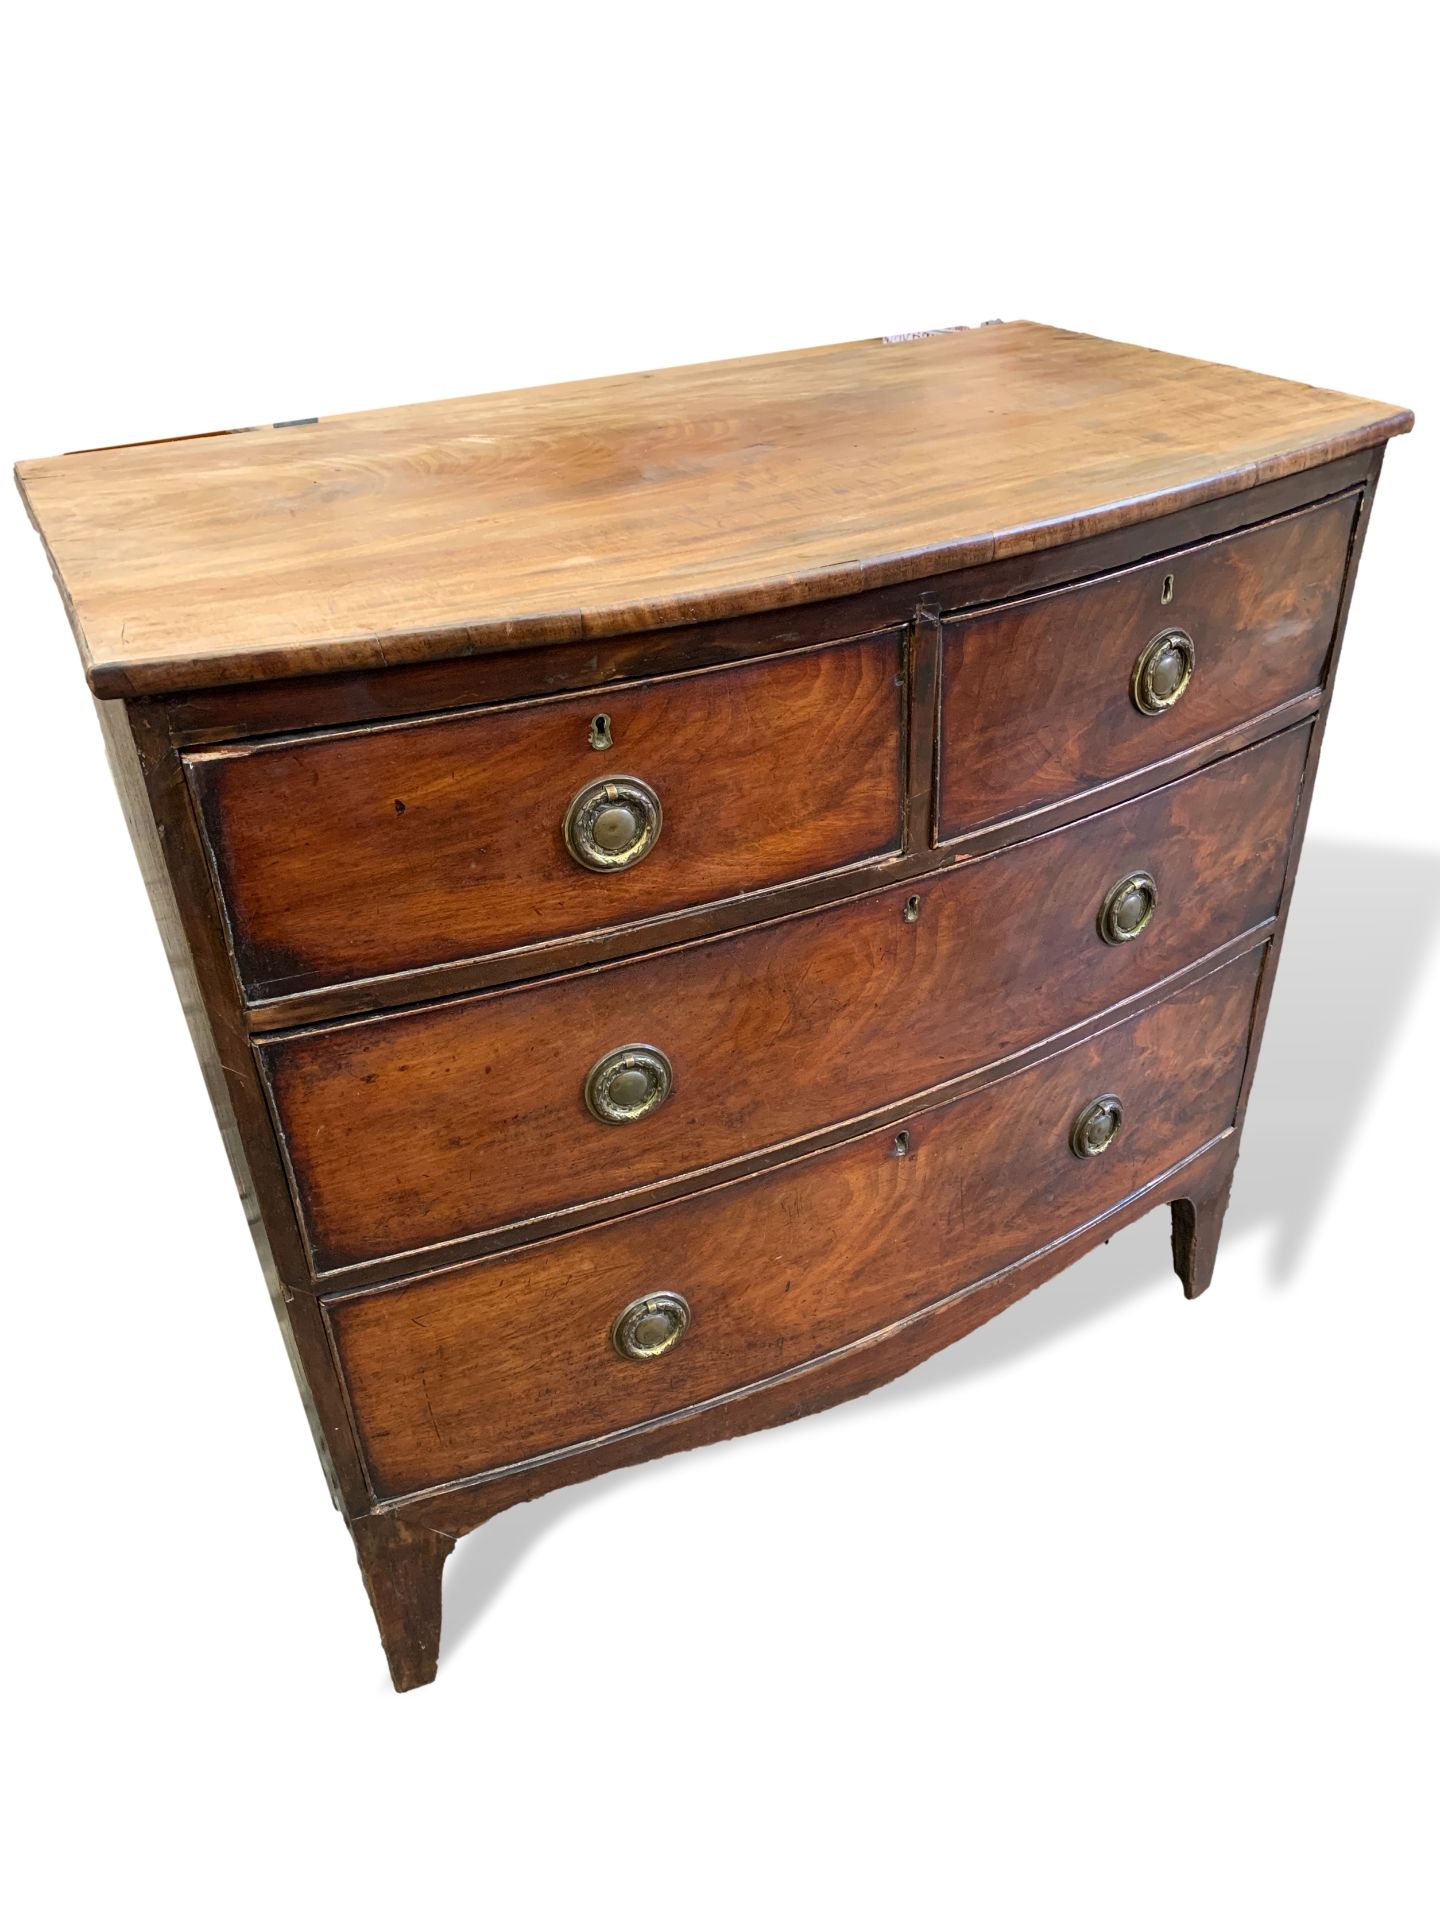 Victorian mahogany bow fronted chest of drawers - Image 3 of 4